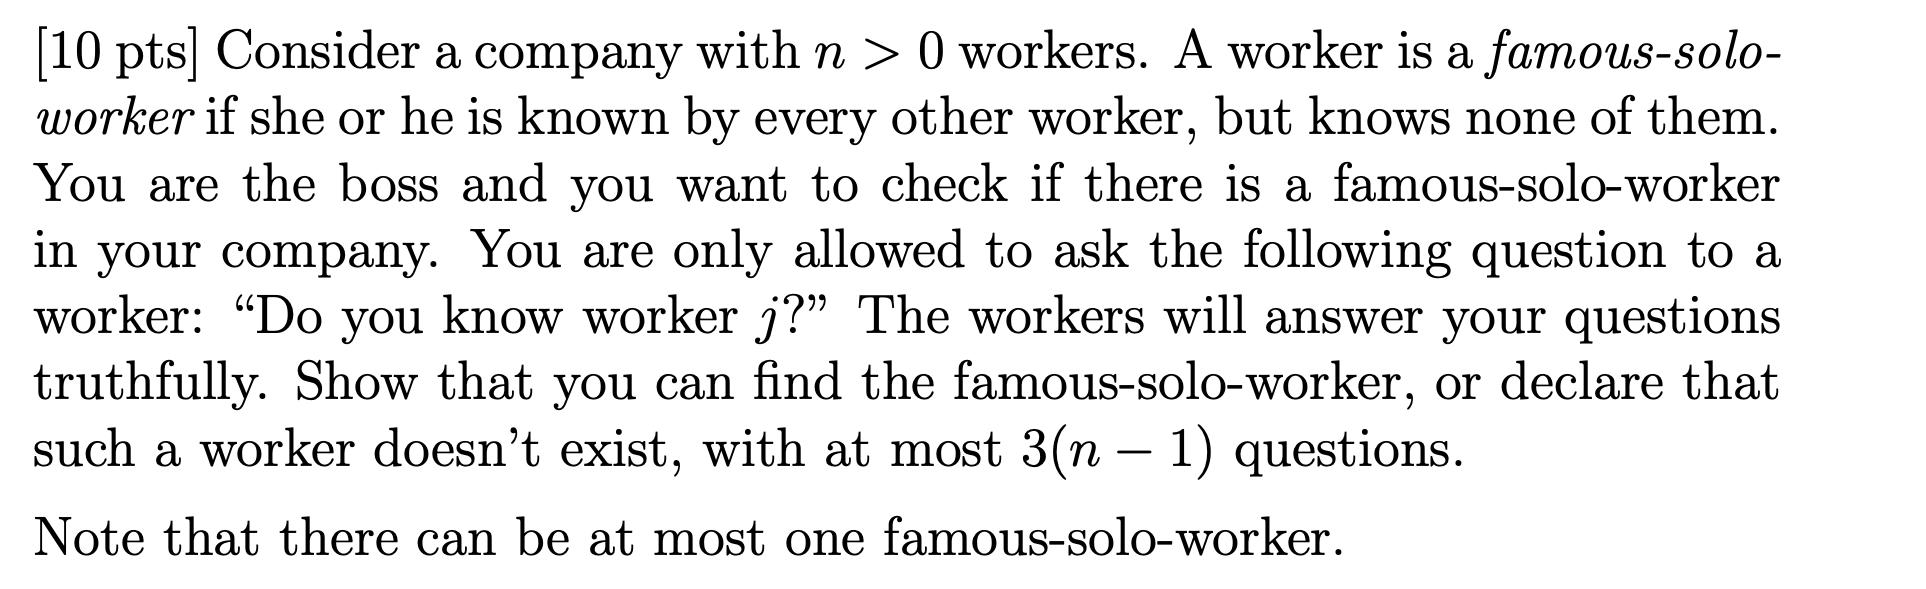 (10 pts] Consider a company with n > 0 workers. A worker is a famous-solo- worker if she or he is known by every other worker